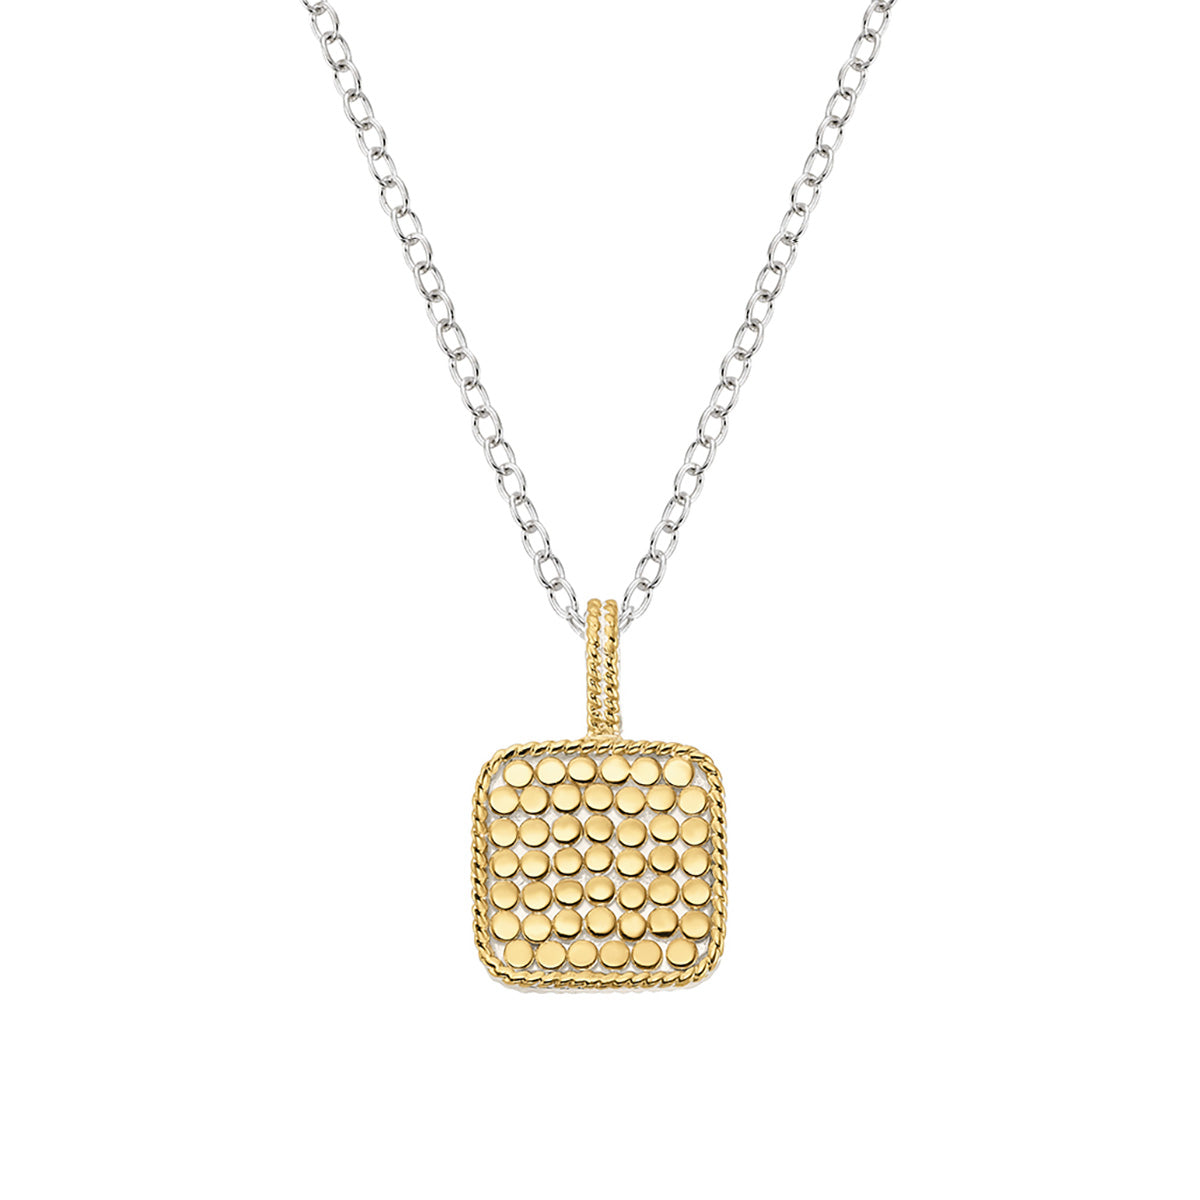 Ana Beck 18k gold plated and sterling silver Reversible Square Necklace